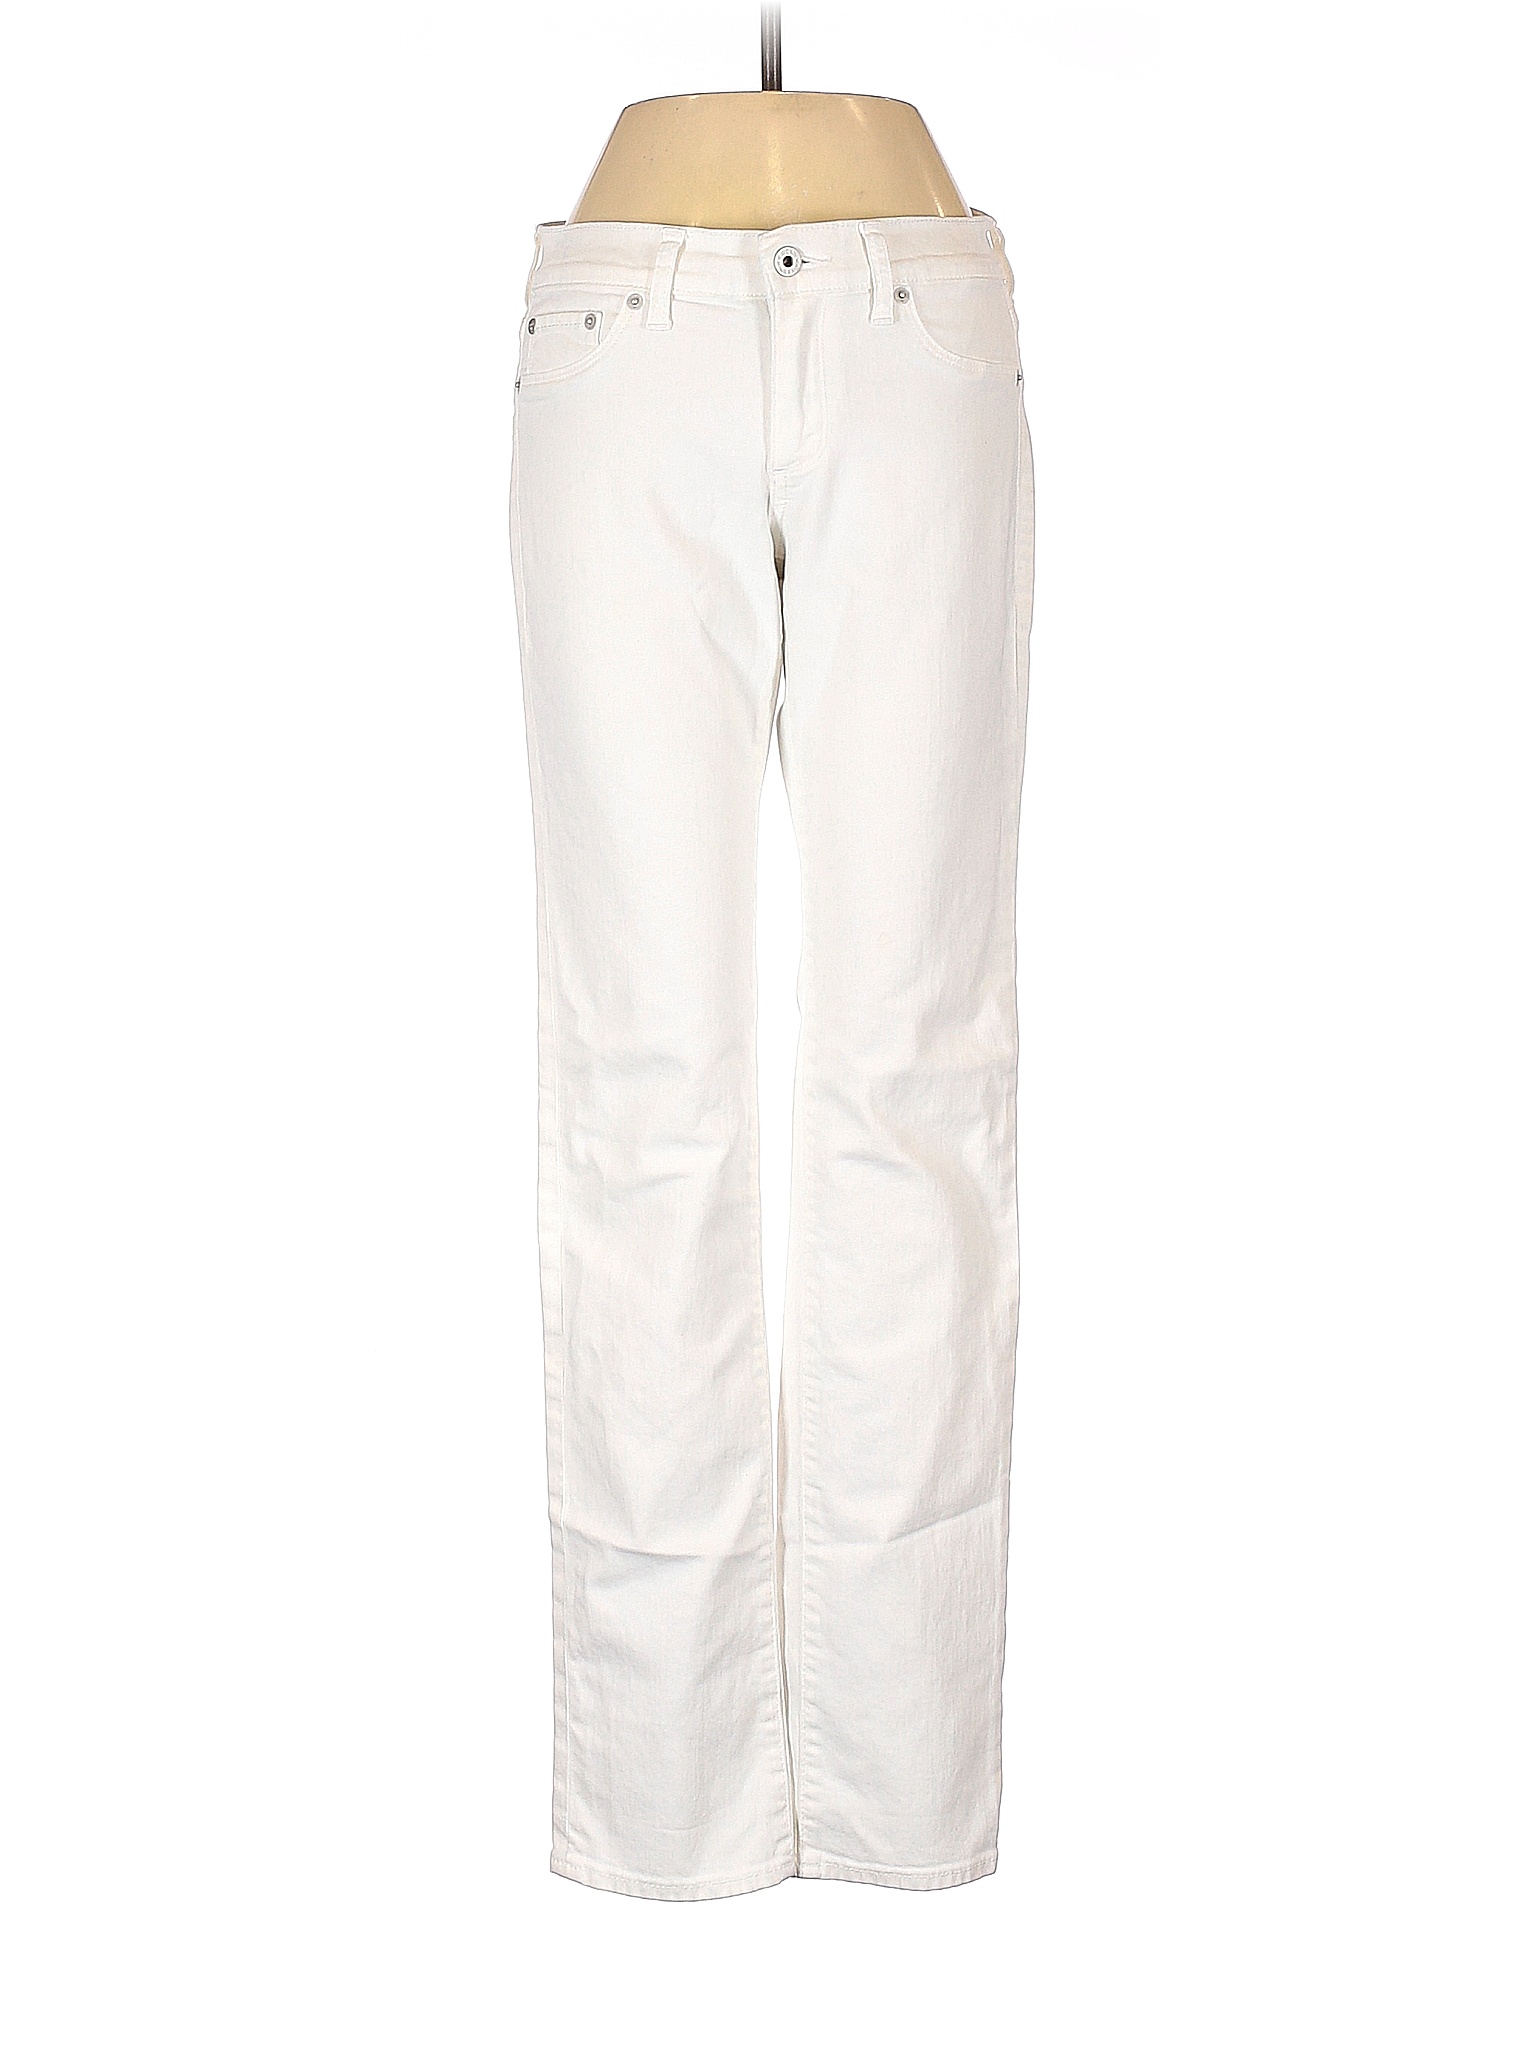 Lucky Brand Solid White Jeans Size 0 - 86% off | thredUP